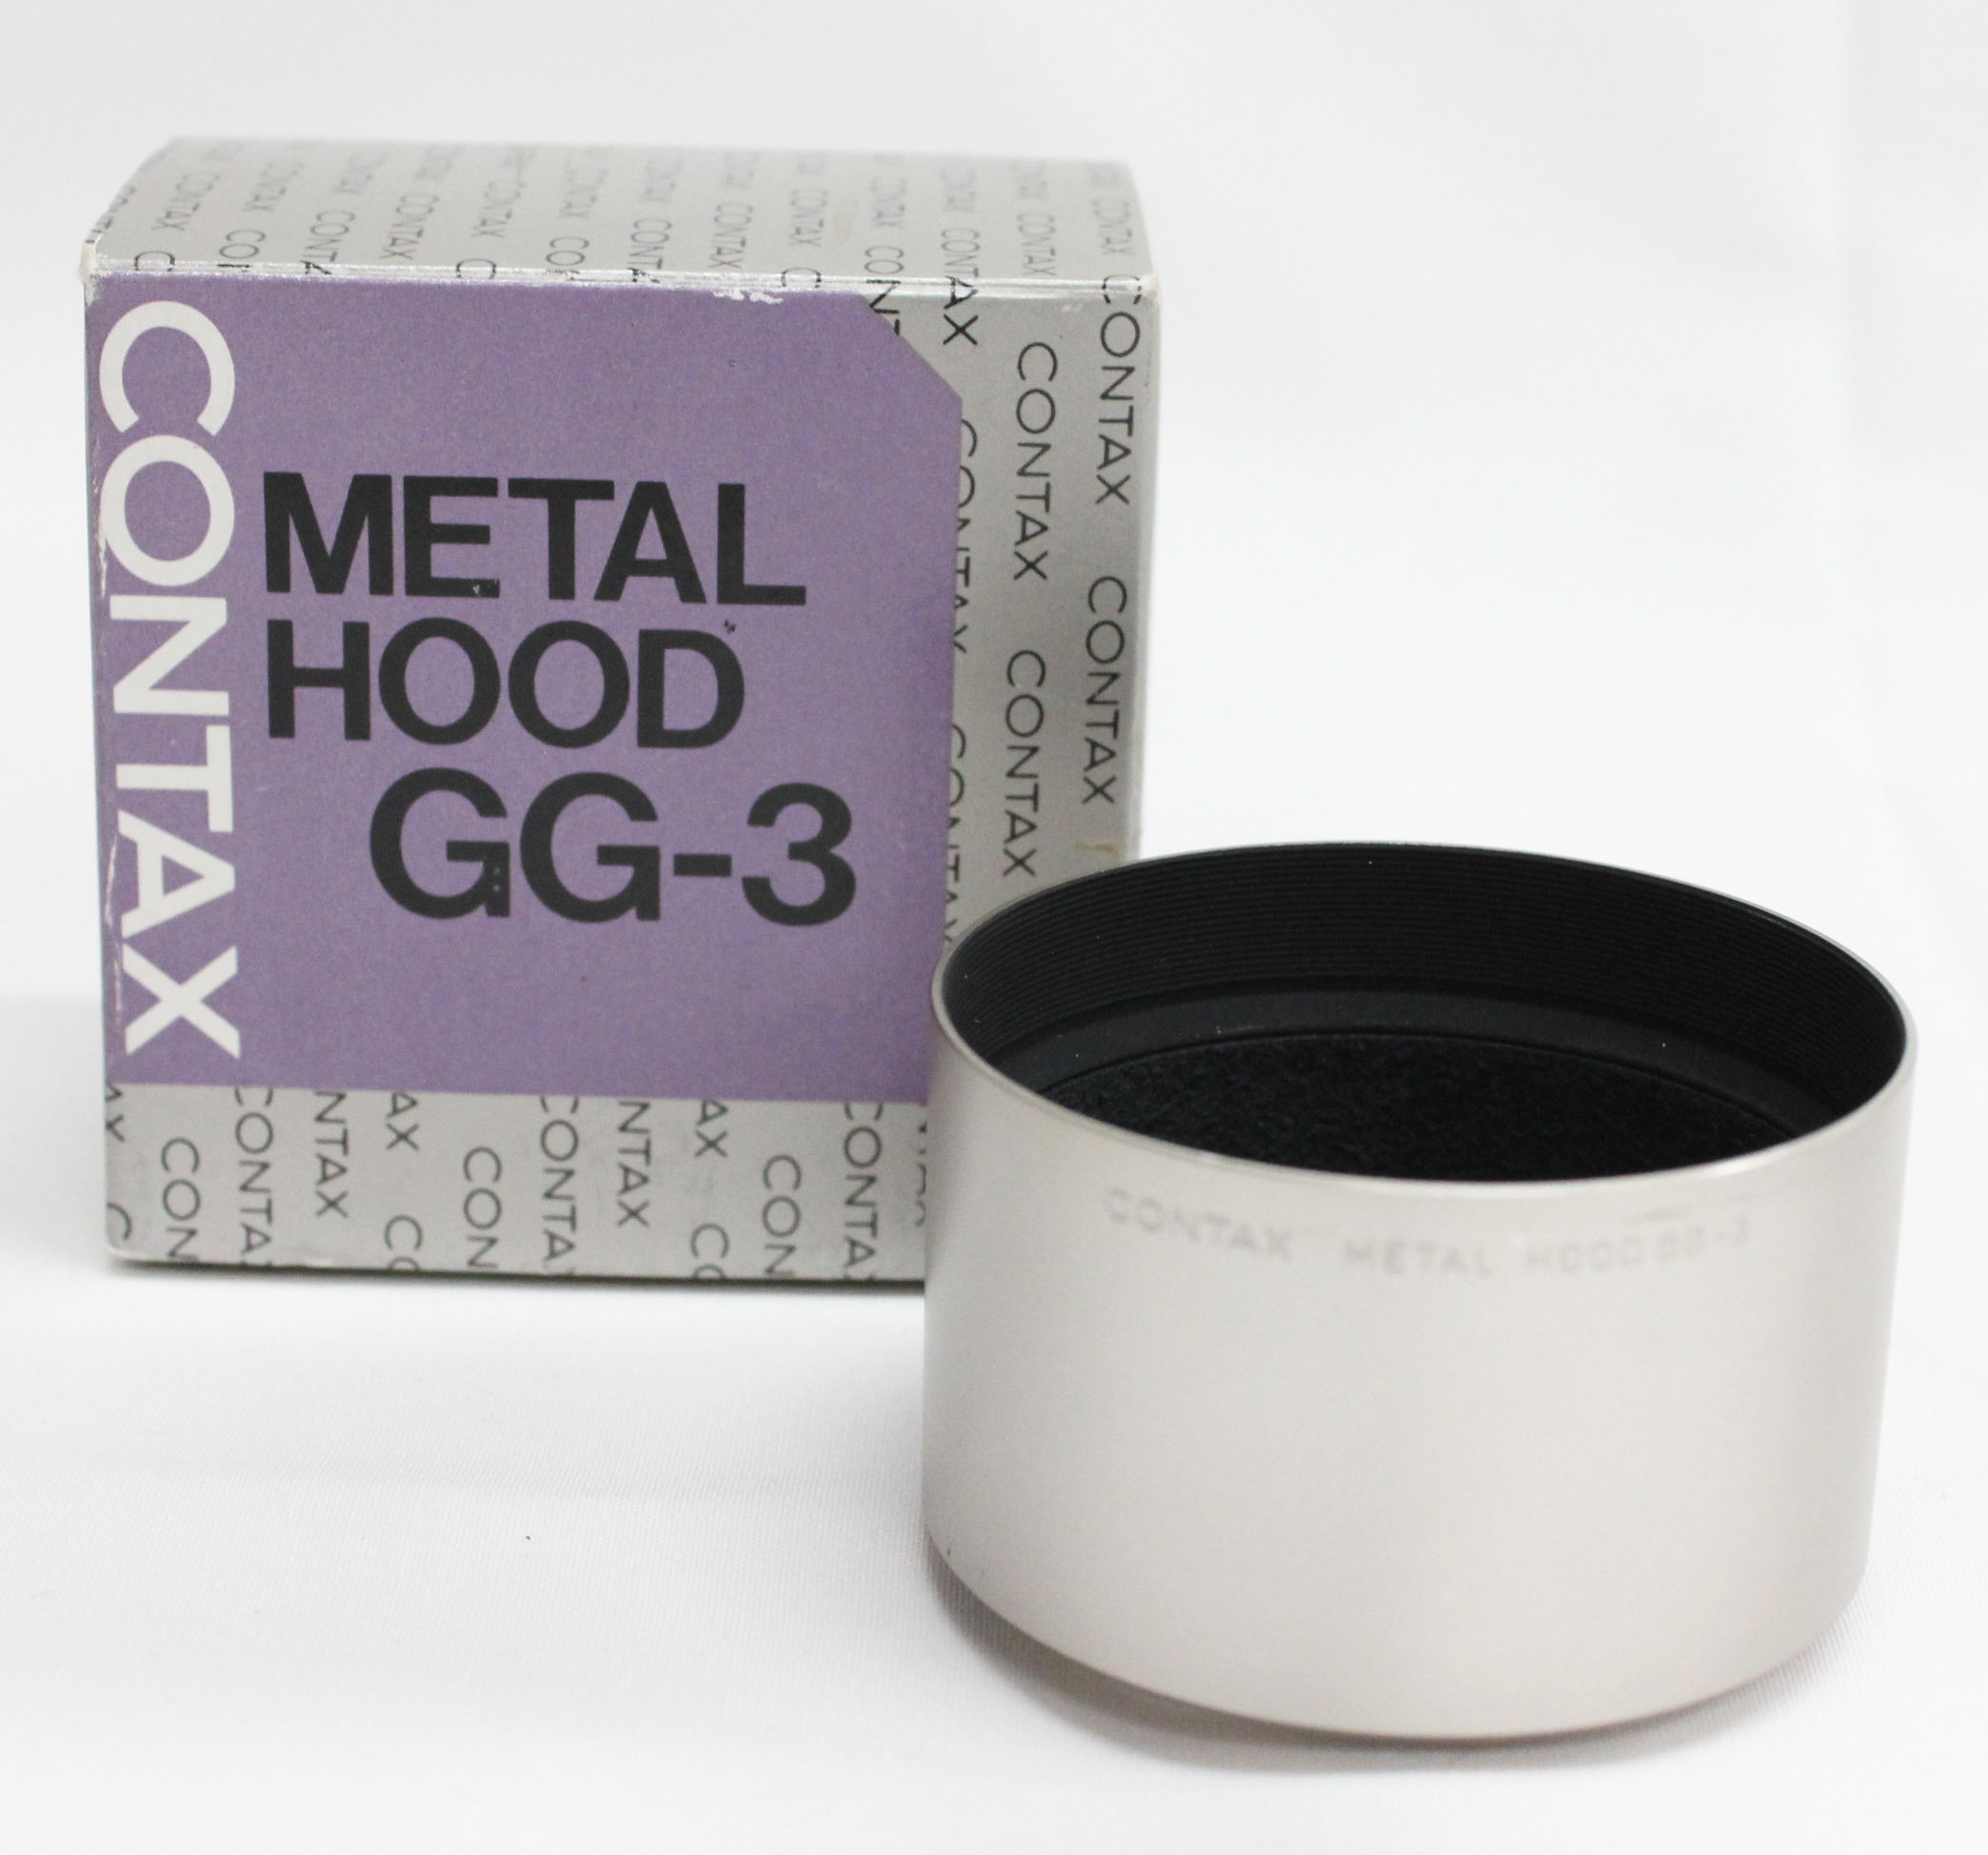 Japan Used Camera Shop | [Mint] Contax Metal Hood GG-3 for G1, G2 Sonnar 90mm F2.8 Lens from Japan